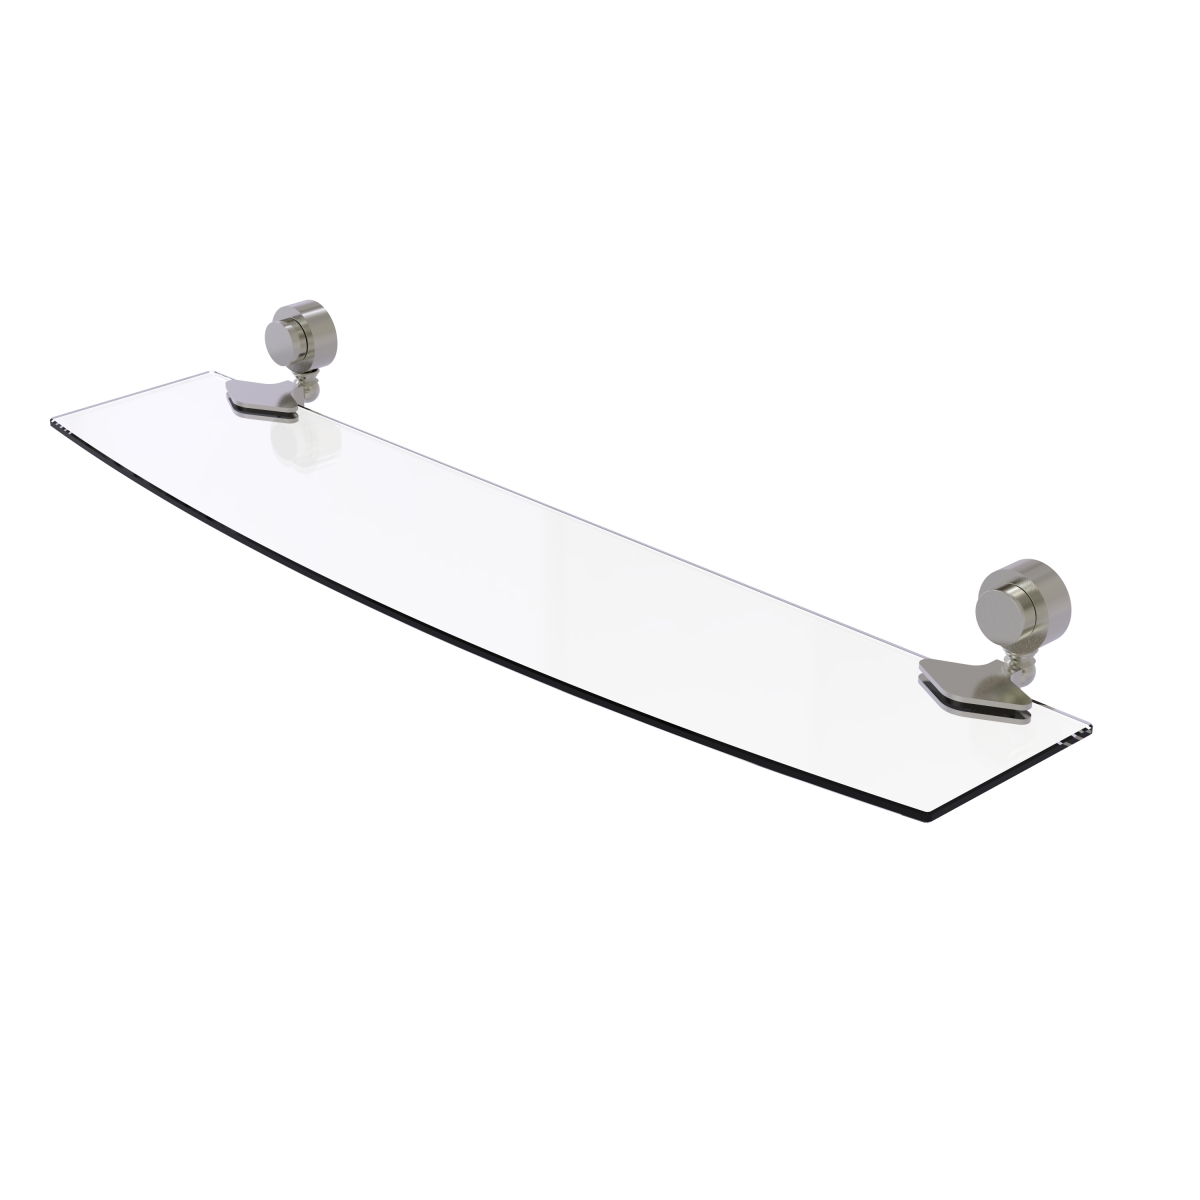 Picture of Allied Brass 433-24-SN 24 in. Venus Collection Glass Shelf, Satin Nickel